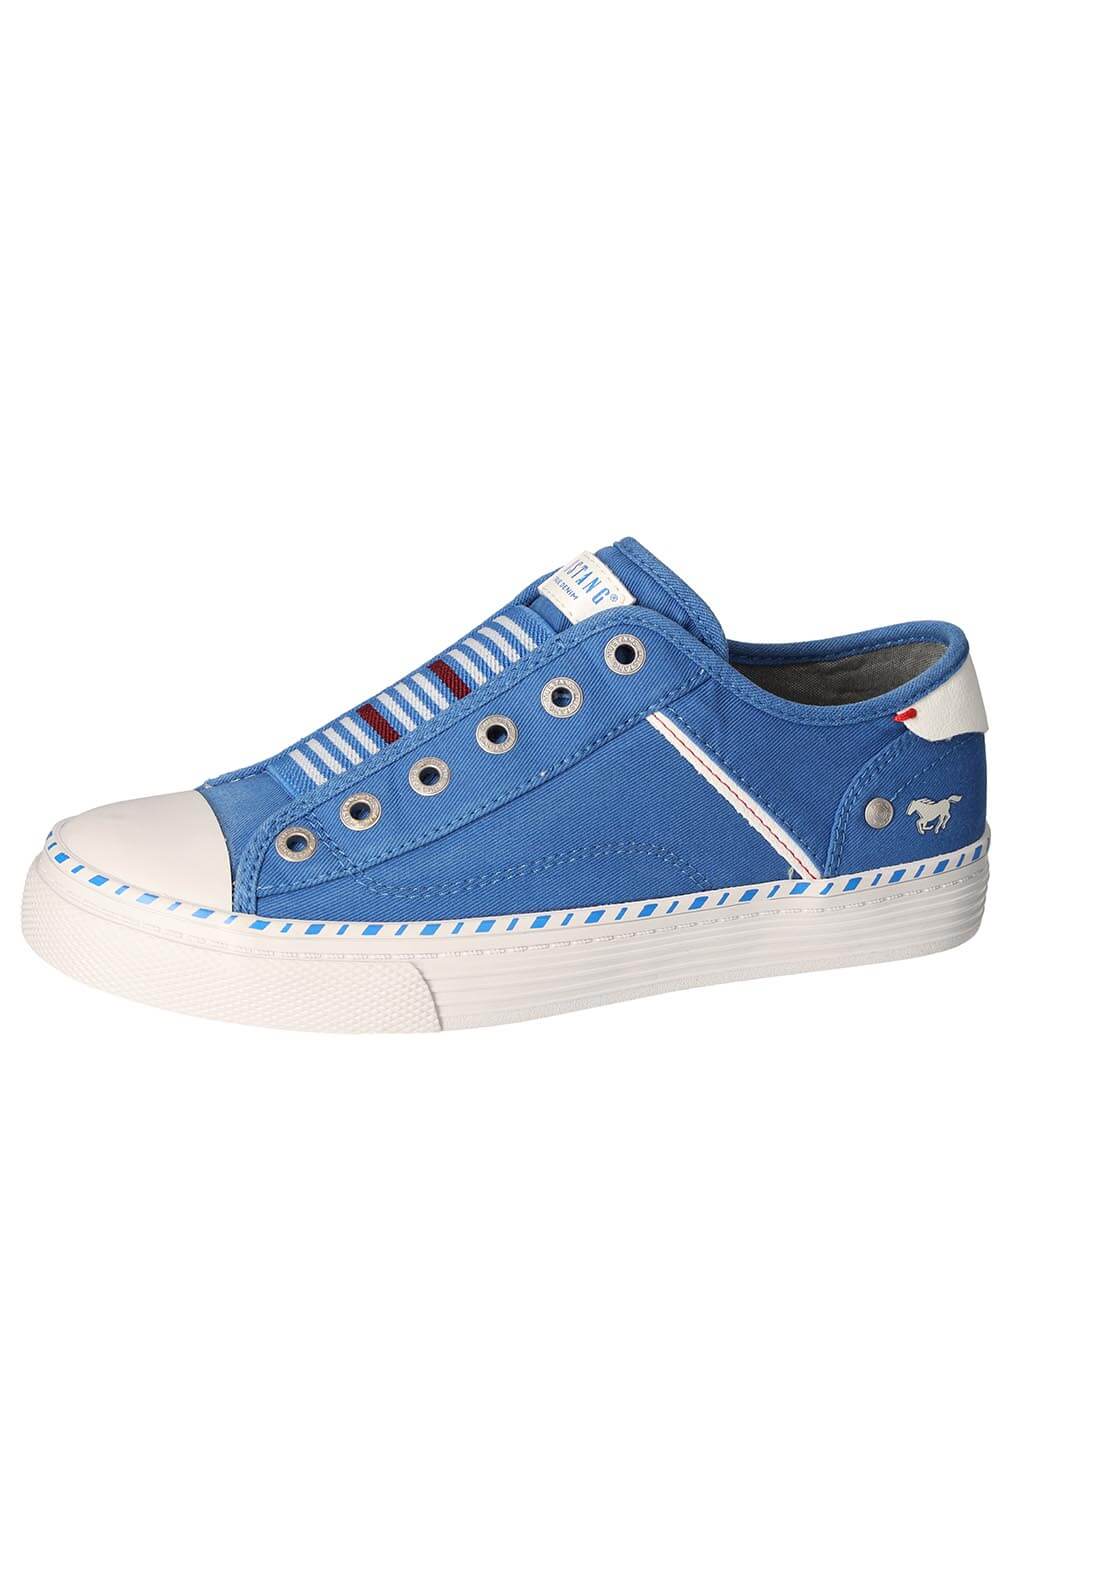 Mustang Slip-On Canvas Trainer - Blue 1 Shaws Department Stores